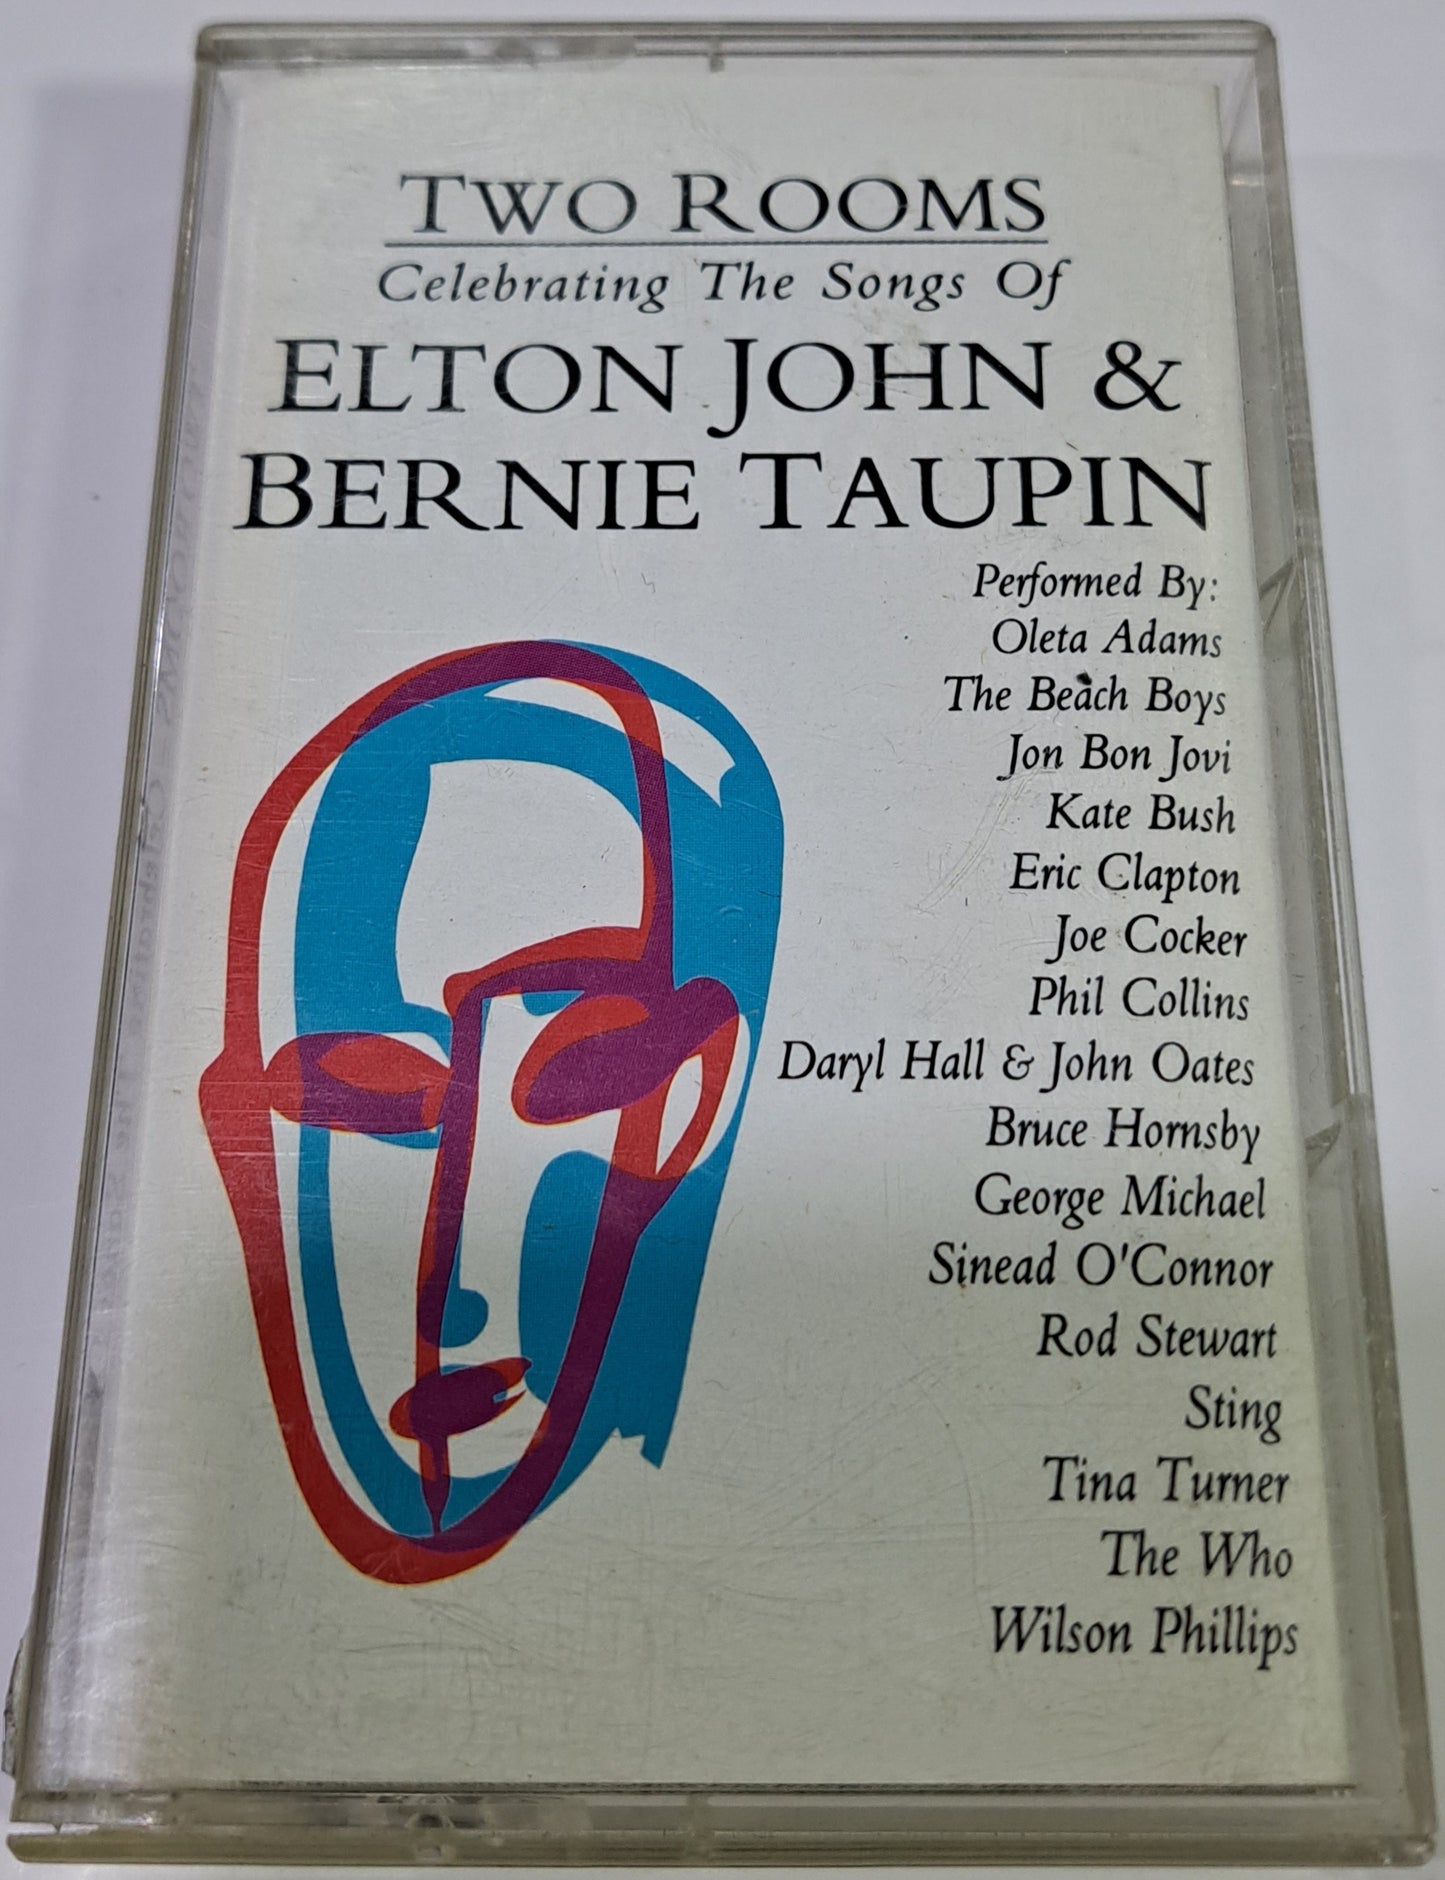 ELTON JOHN Y BERNIE TAUPIN - TWO ROOMS CELEBRATING THE SONGS OF  CASSETTE